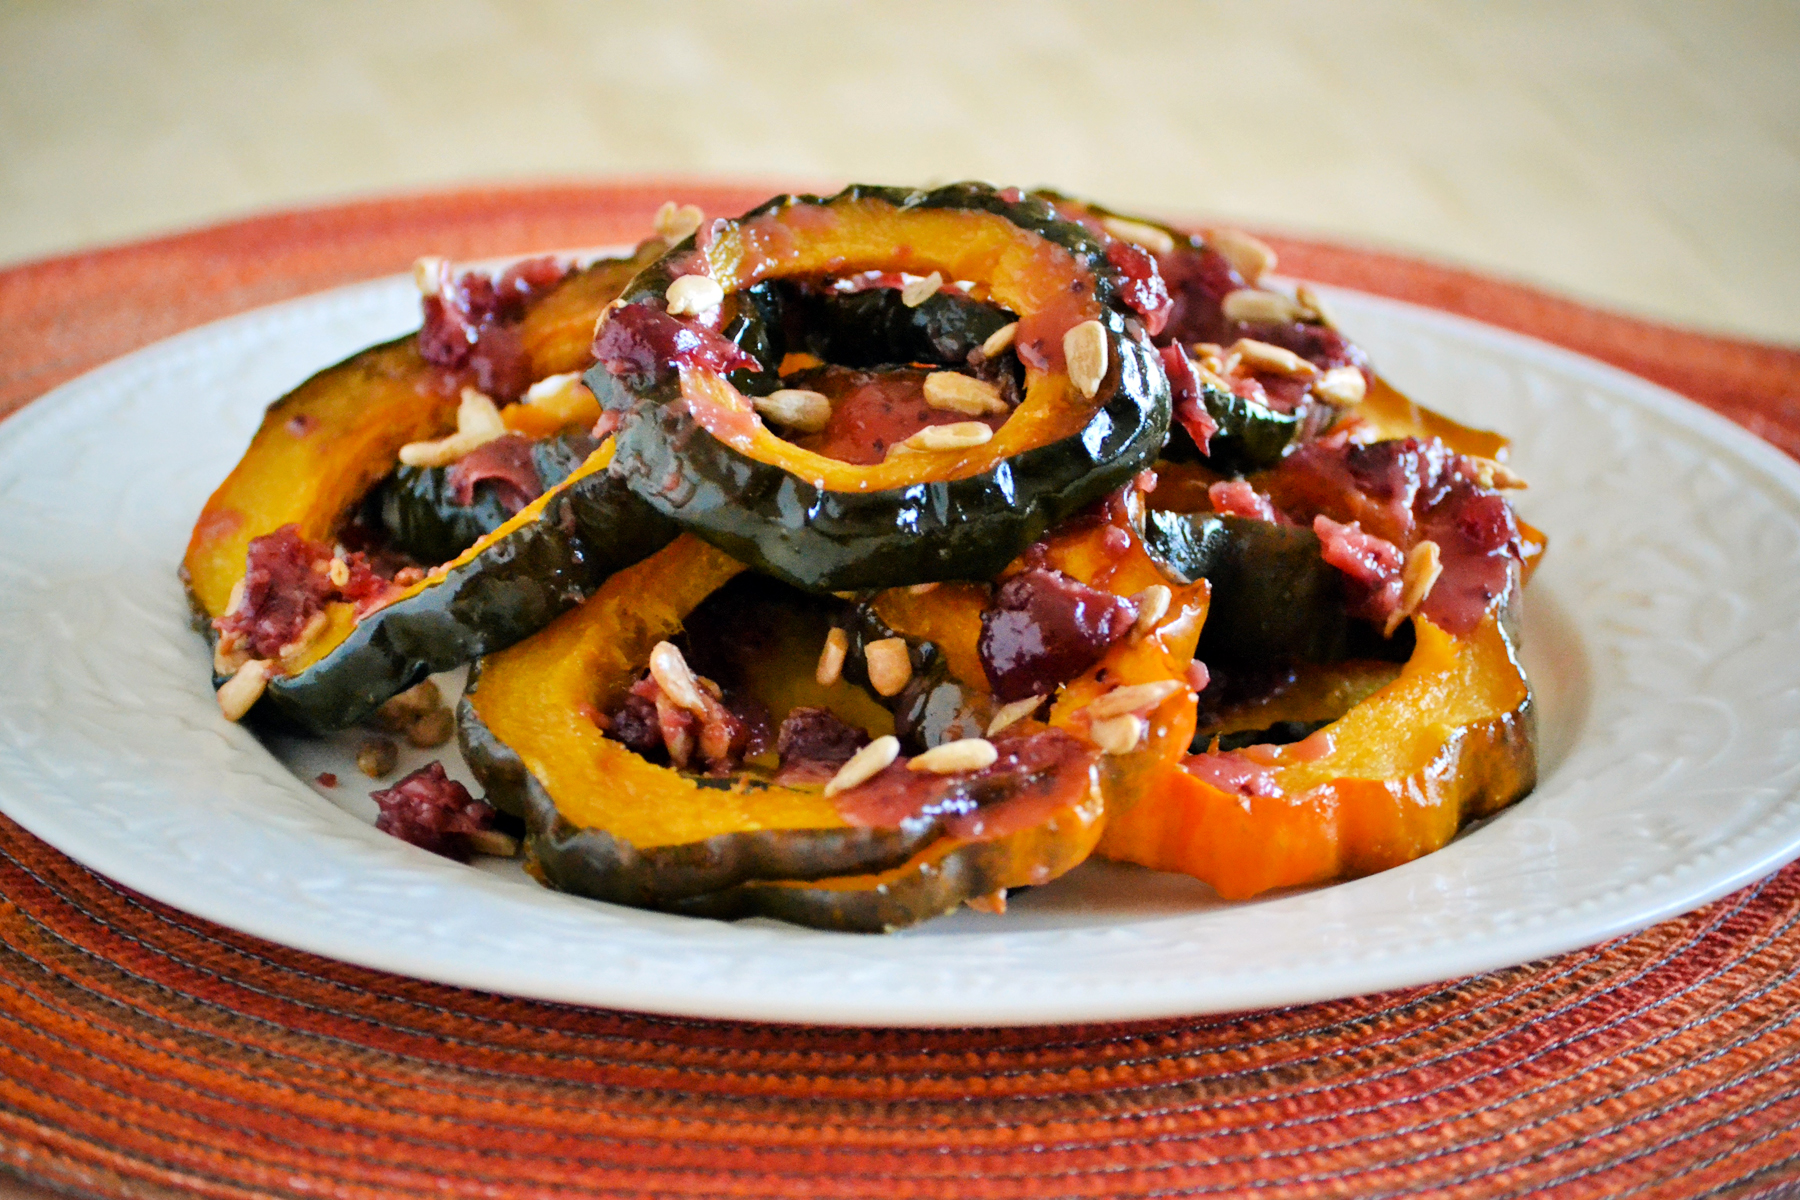 Roasted Acorn Squash with Cranberry Sauce Photo